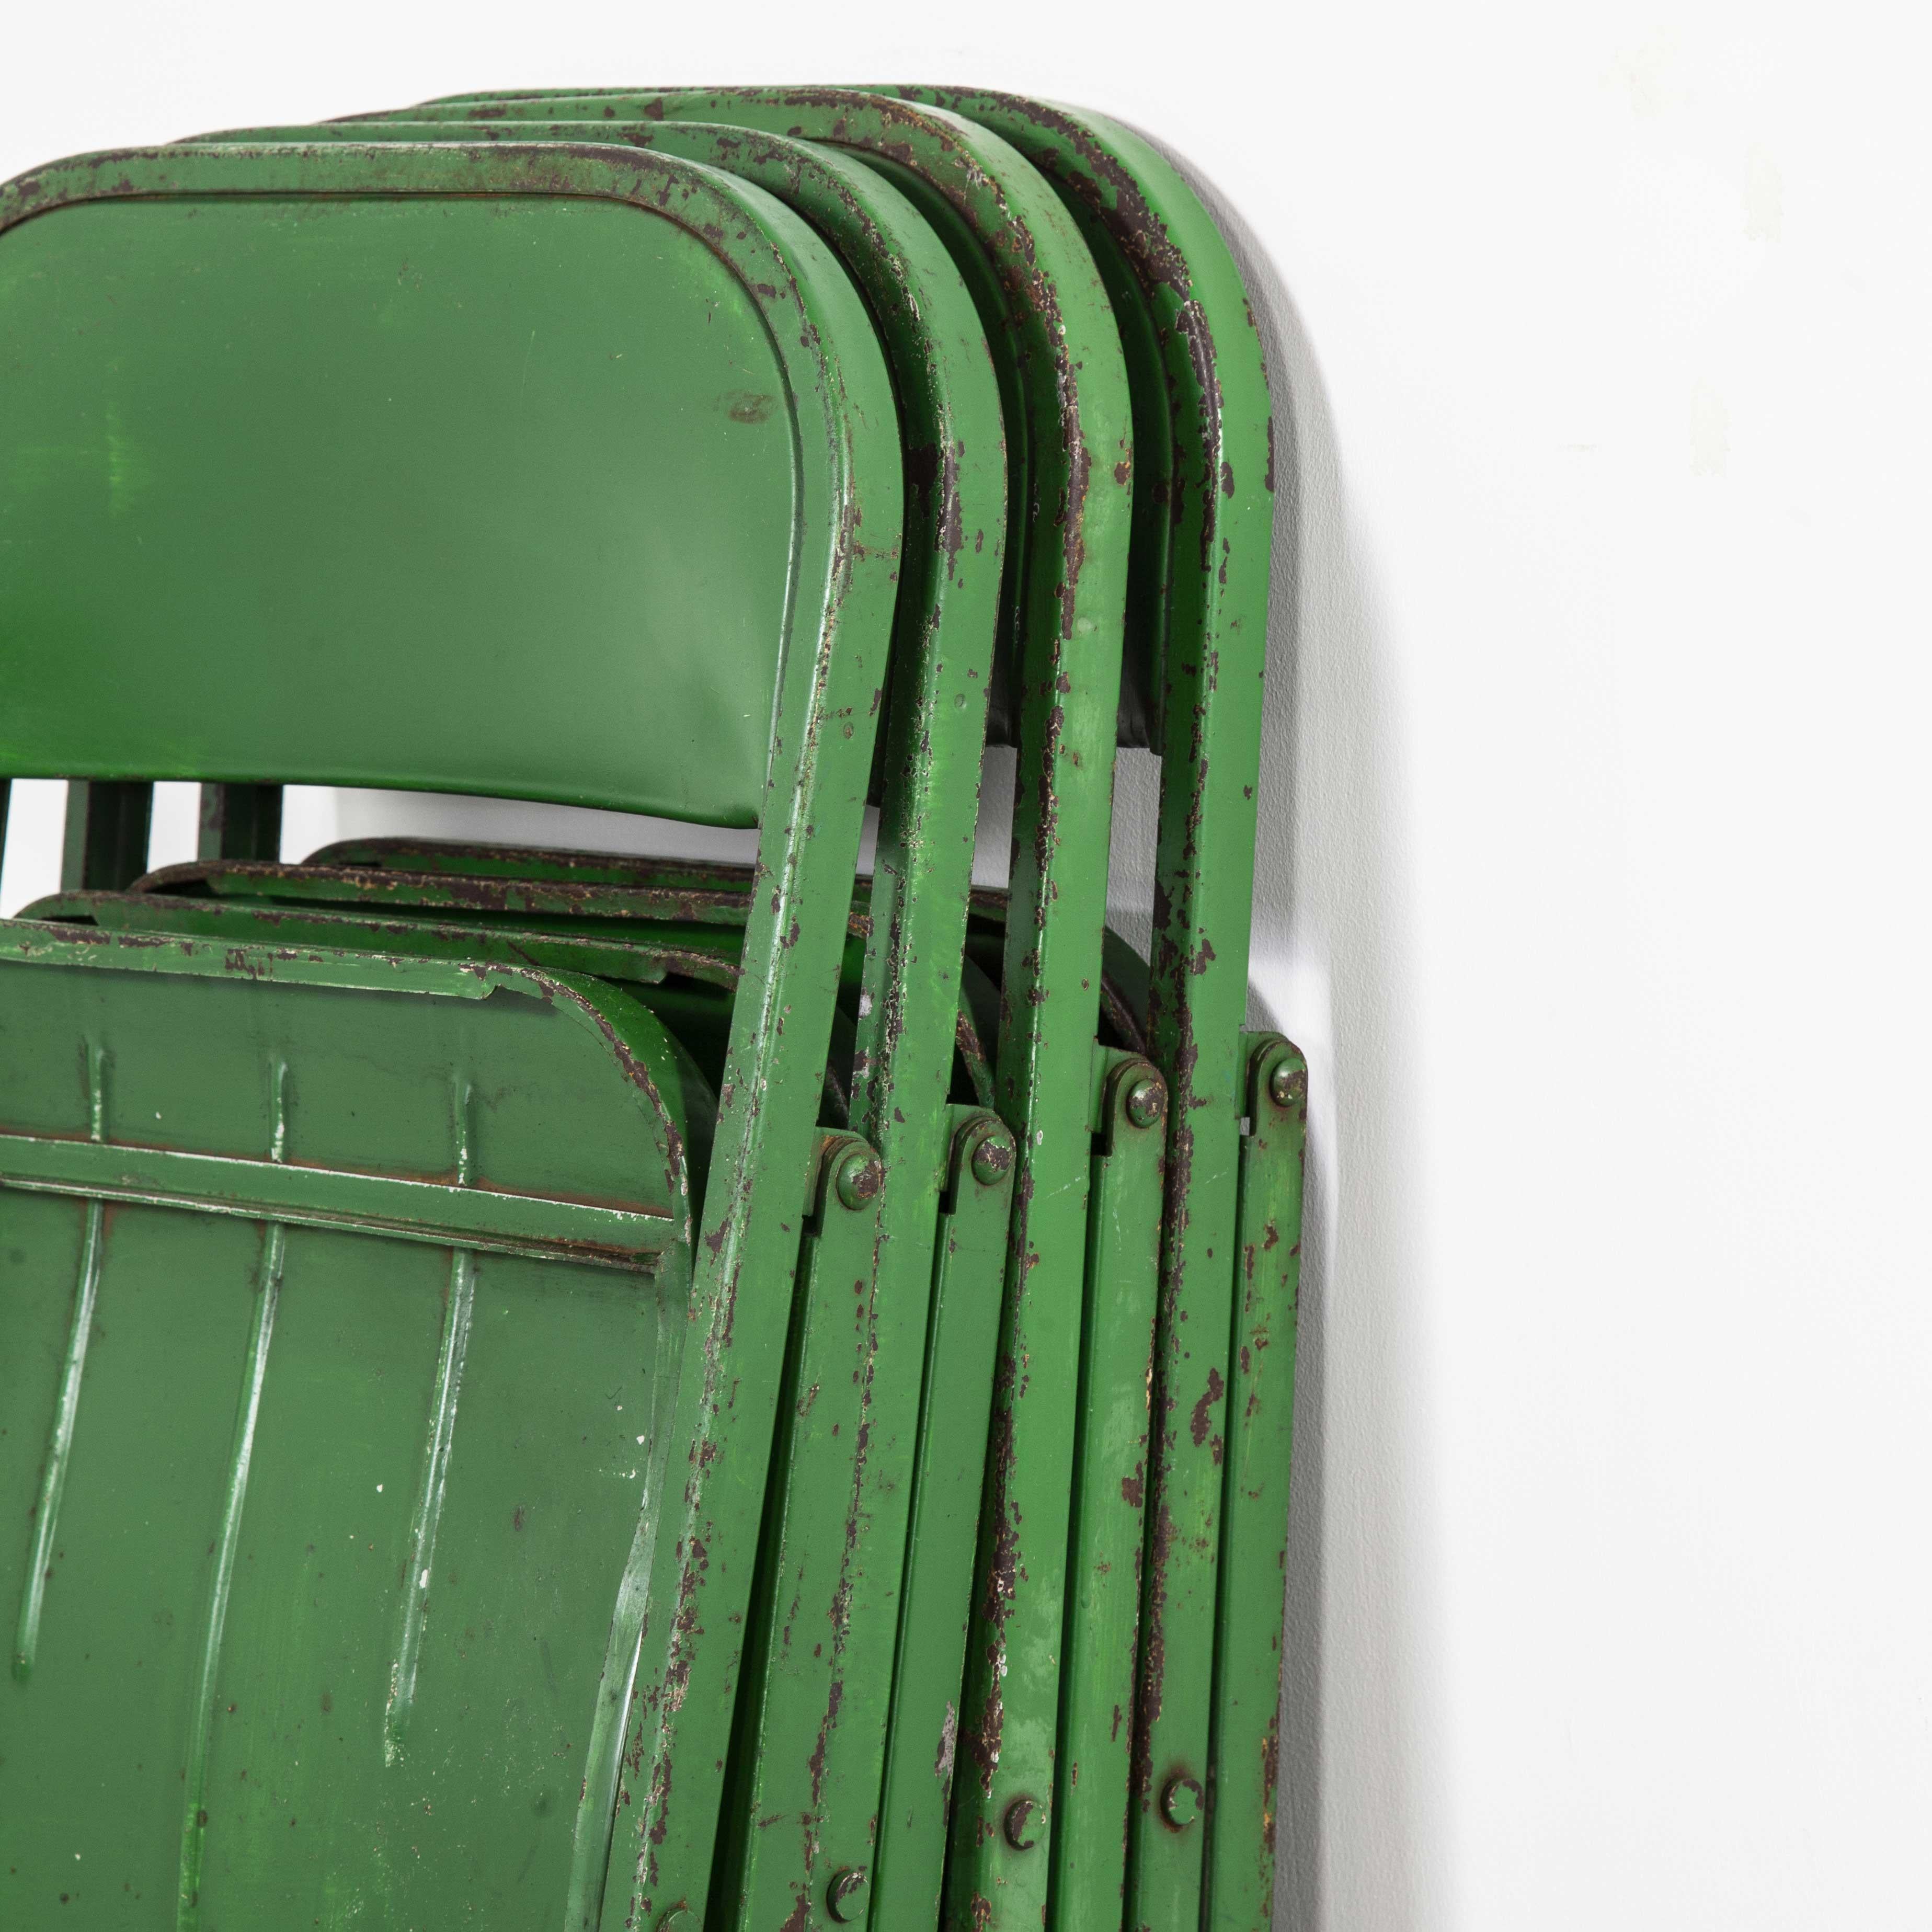 1960s French green metal folding chairs, set of eight

1960s French green metal folding chairs, set of eight. Very good quality French folding chairs from the 1960s, we don’t know the history or the maker but they are heavy and solid with great